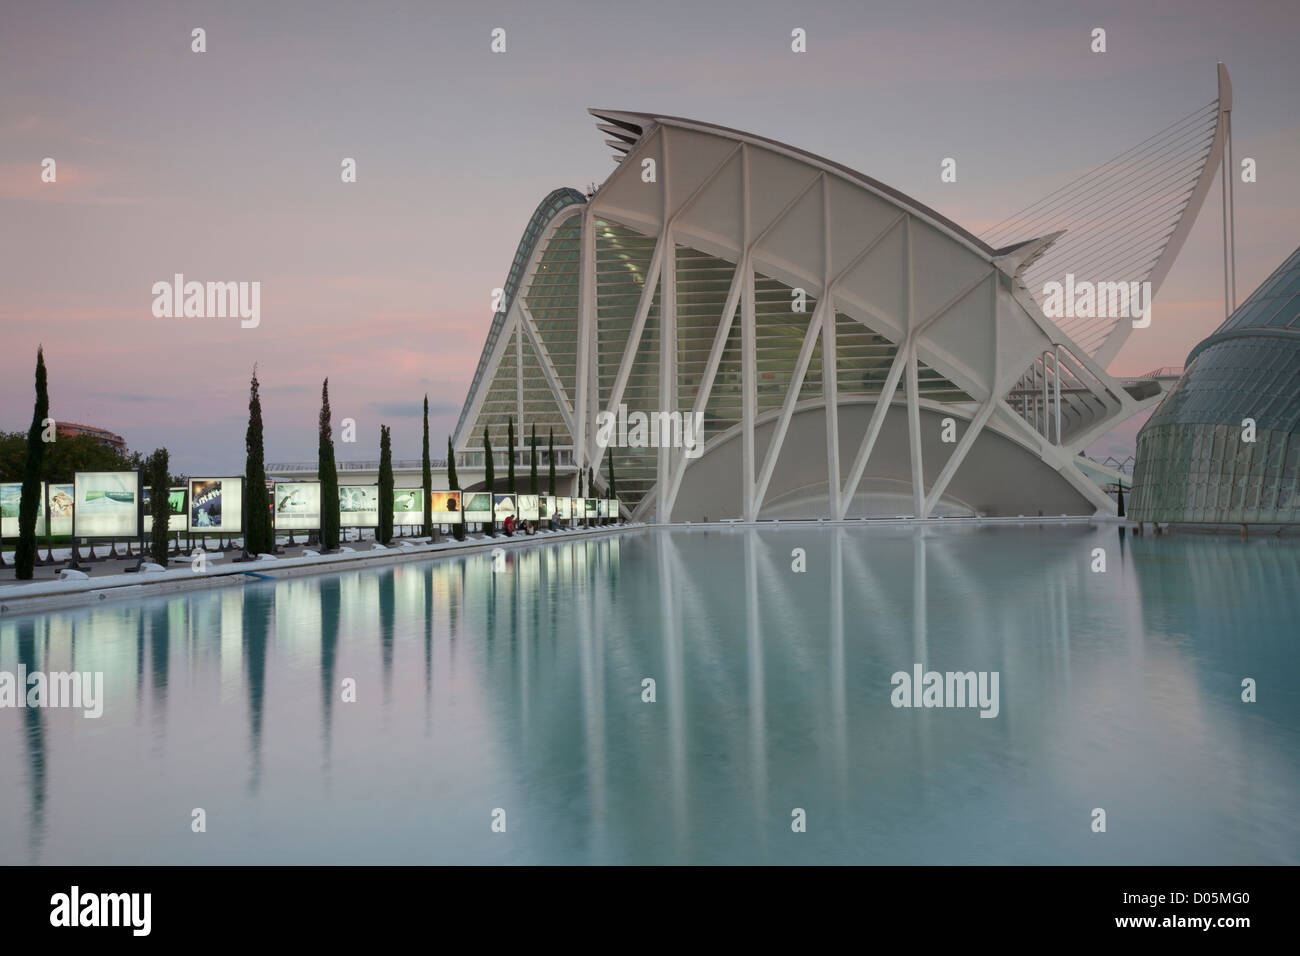 Museu de les Ciencies, City of Arts & Sciences, Valencia, reflected in calm water at sunset. Stock Photo